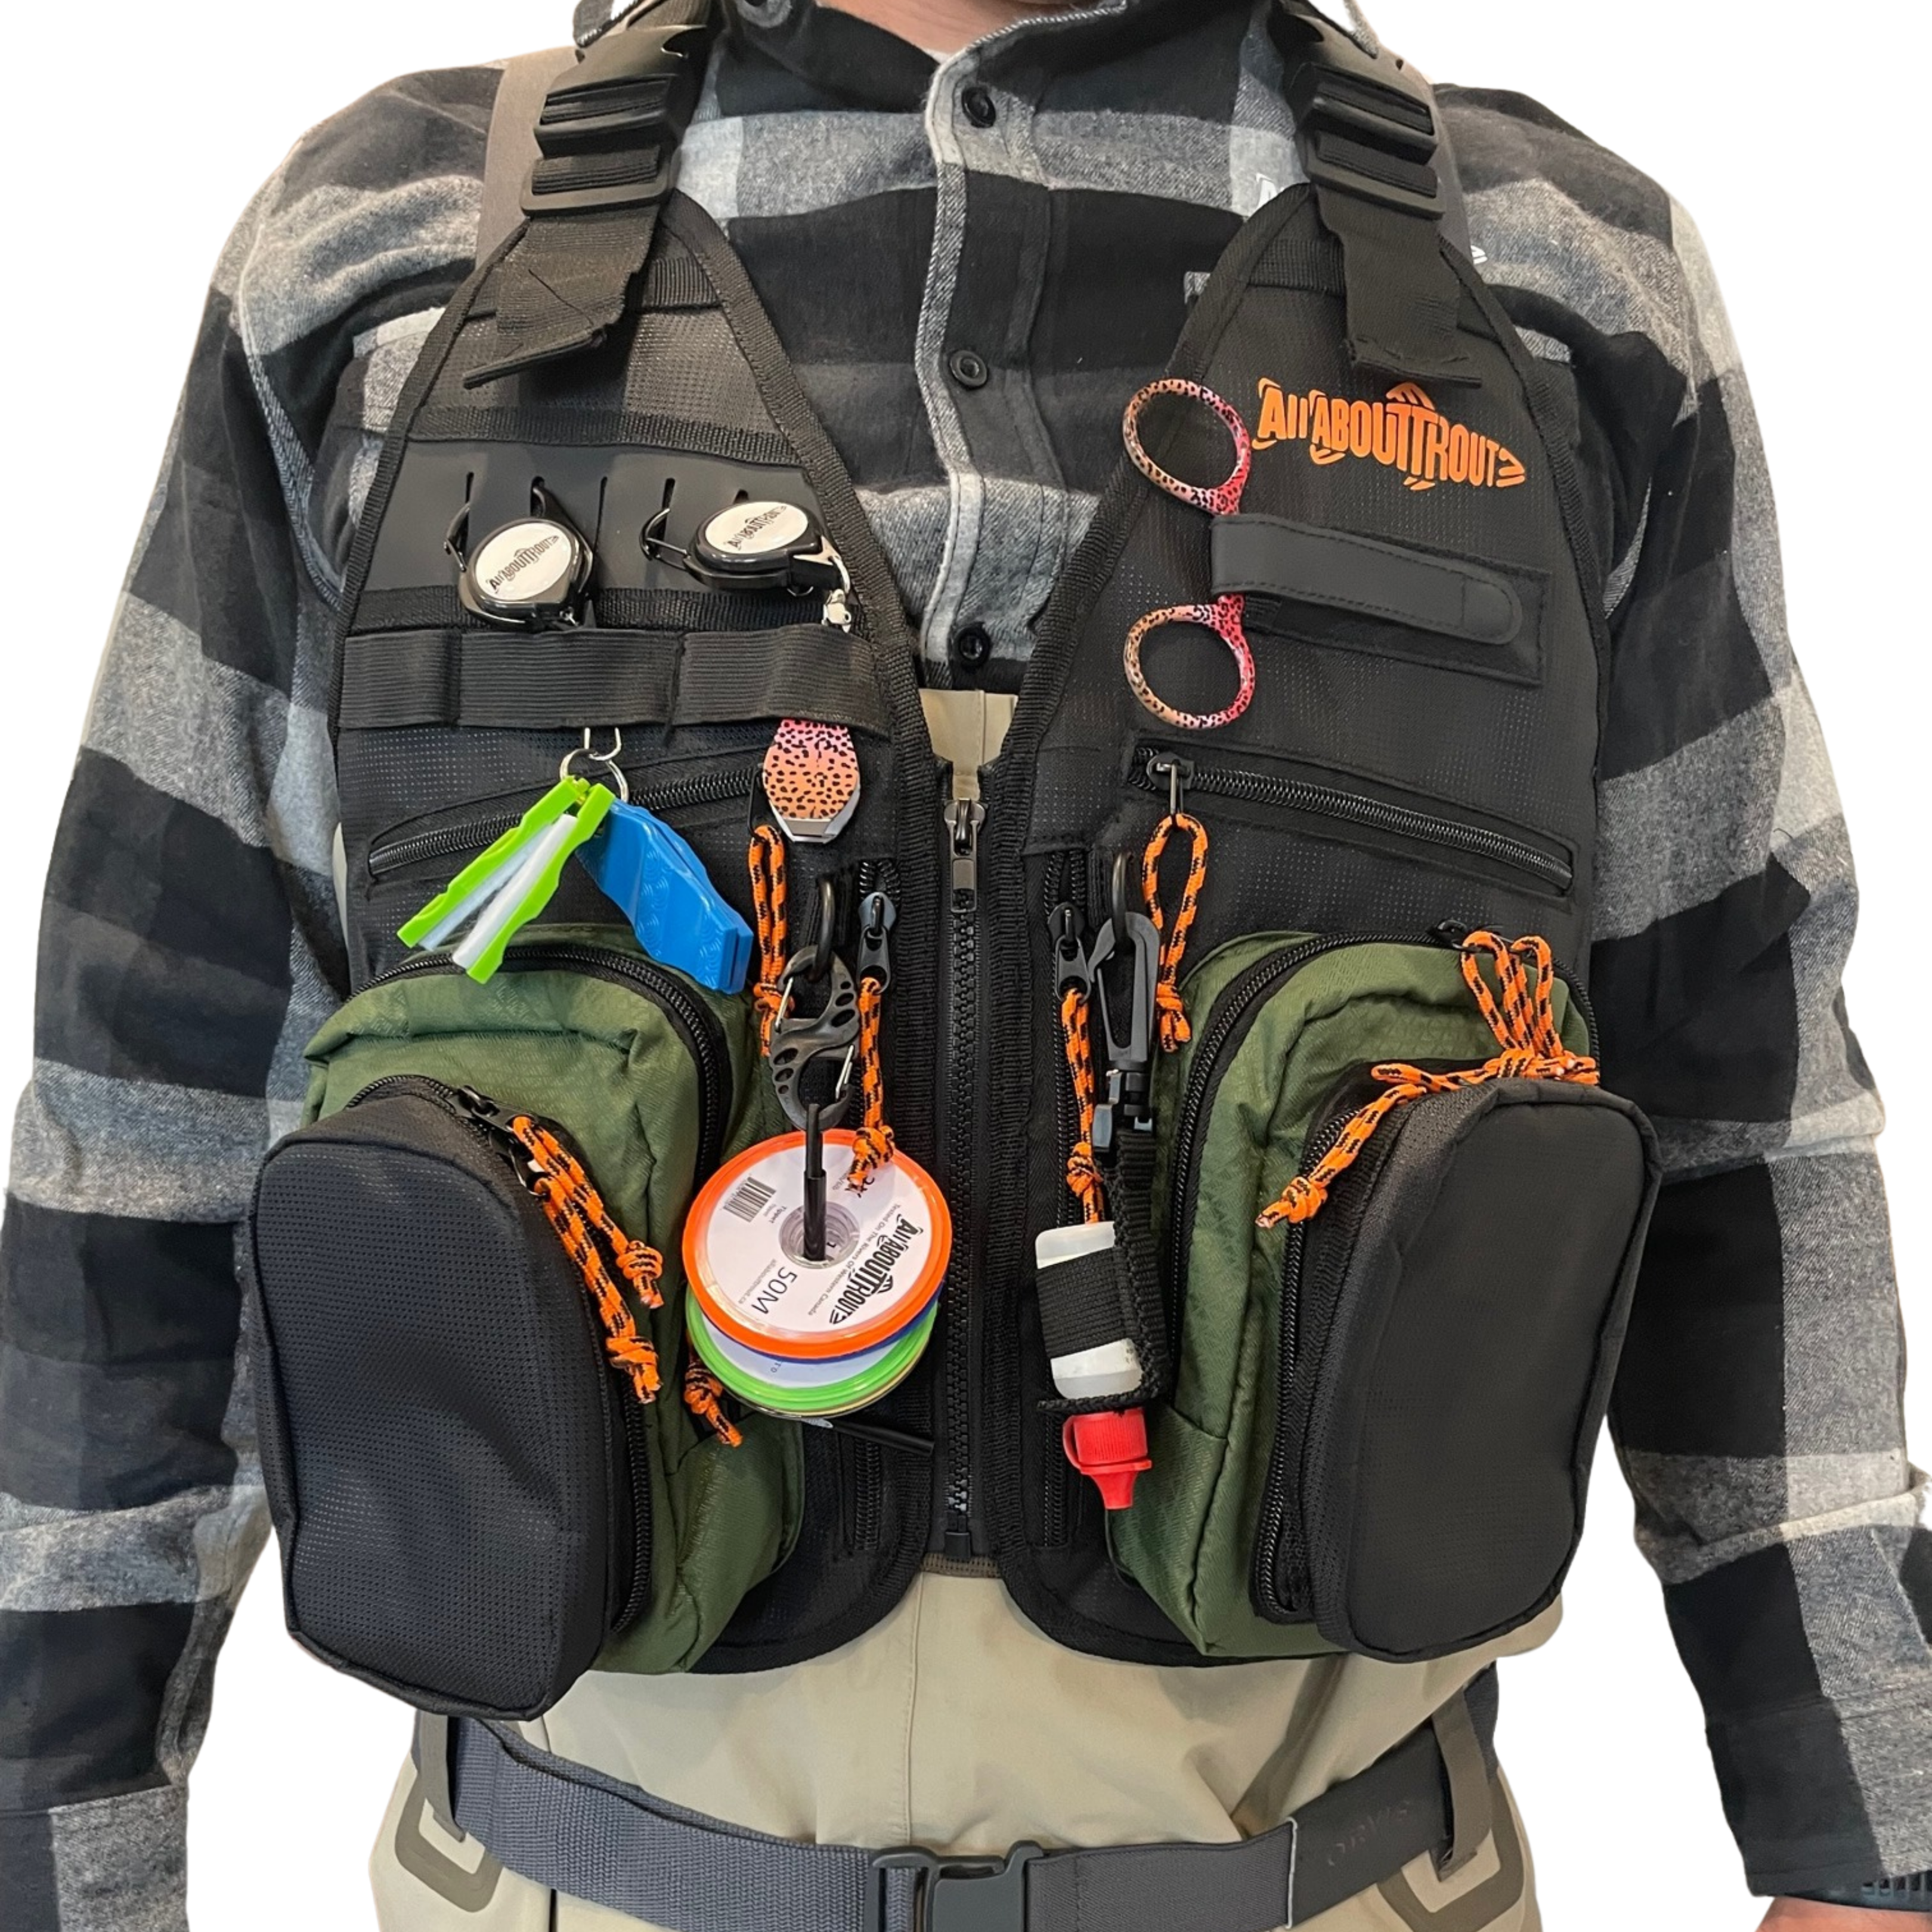 Tailwater Tech Pack - 2022 Model – All About Trout